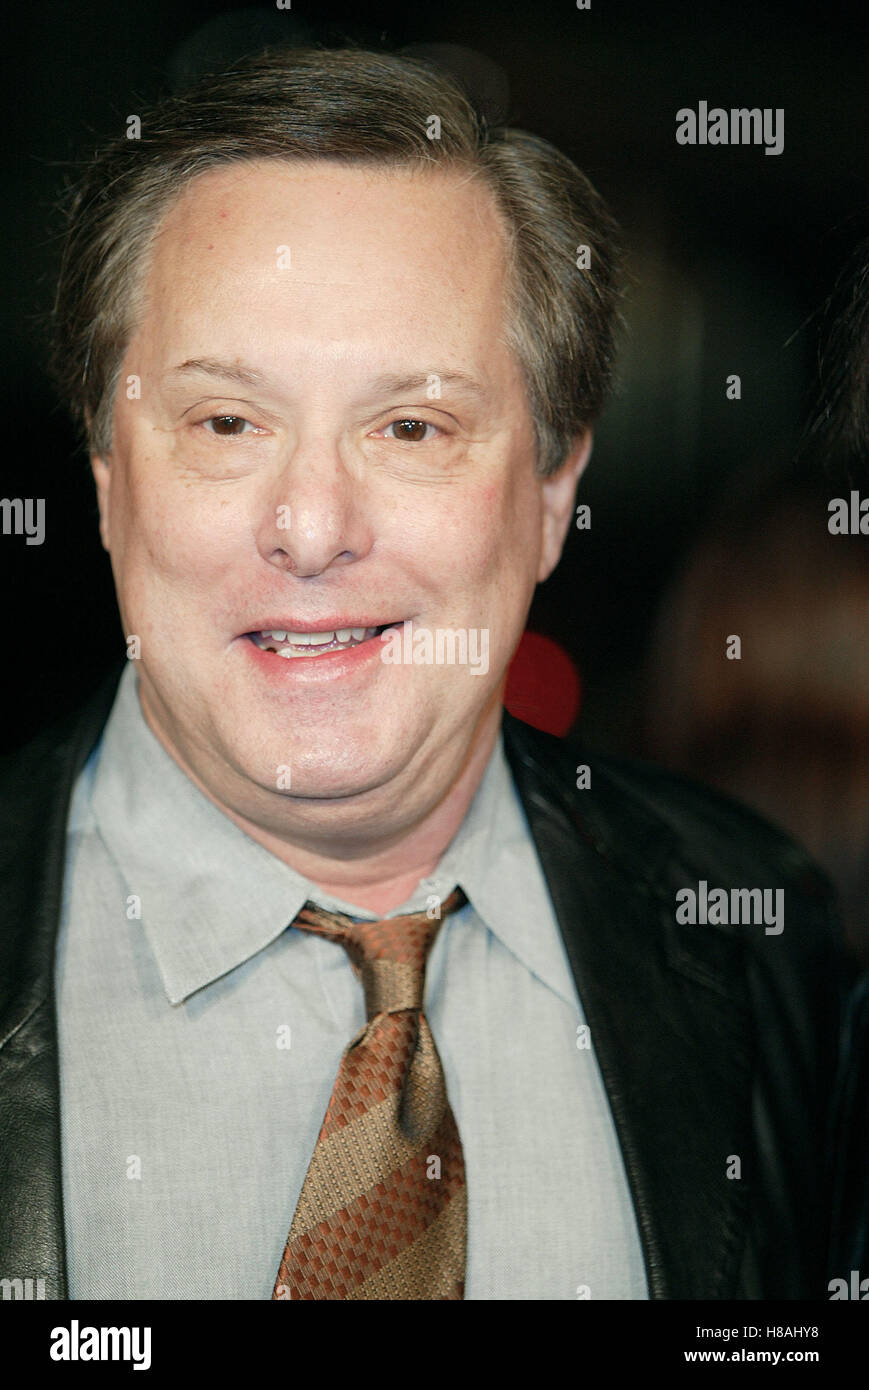 WILLIAM FRIEDKIN PAYCHECK WORLD PREMIERE CHINESE THEATRE HOLLYWOOD LOS ANGELES USA 18 December 2003 Stock Photo